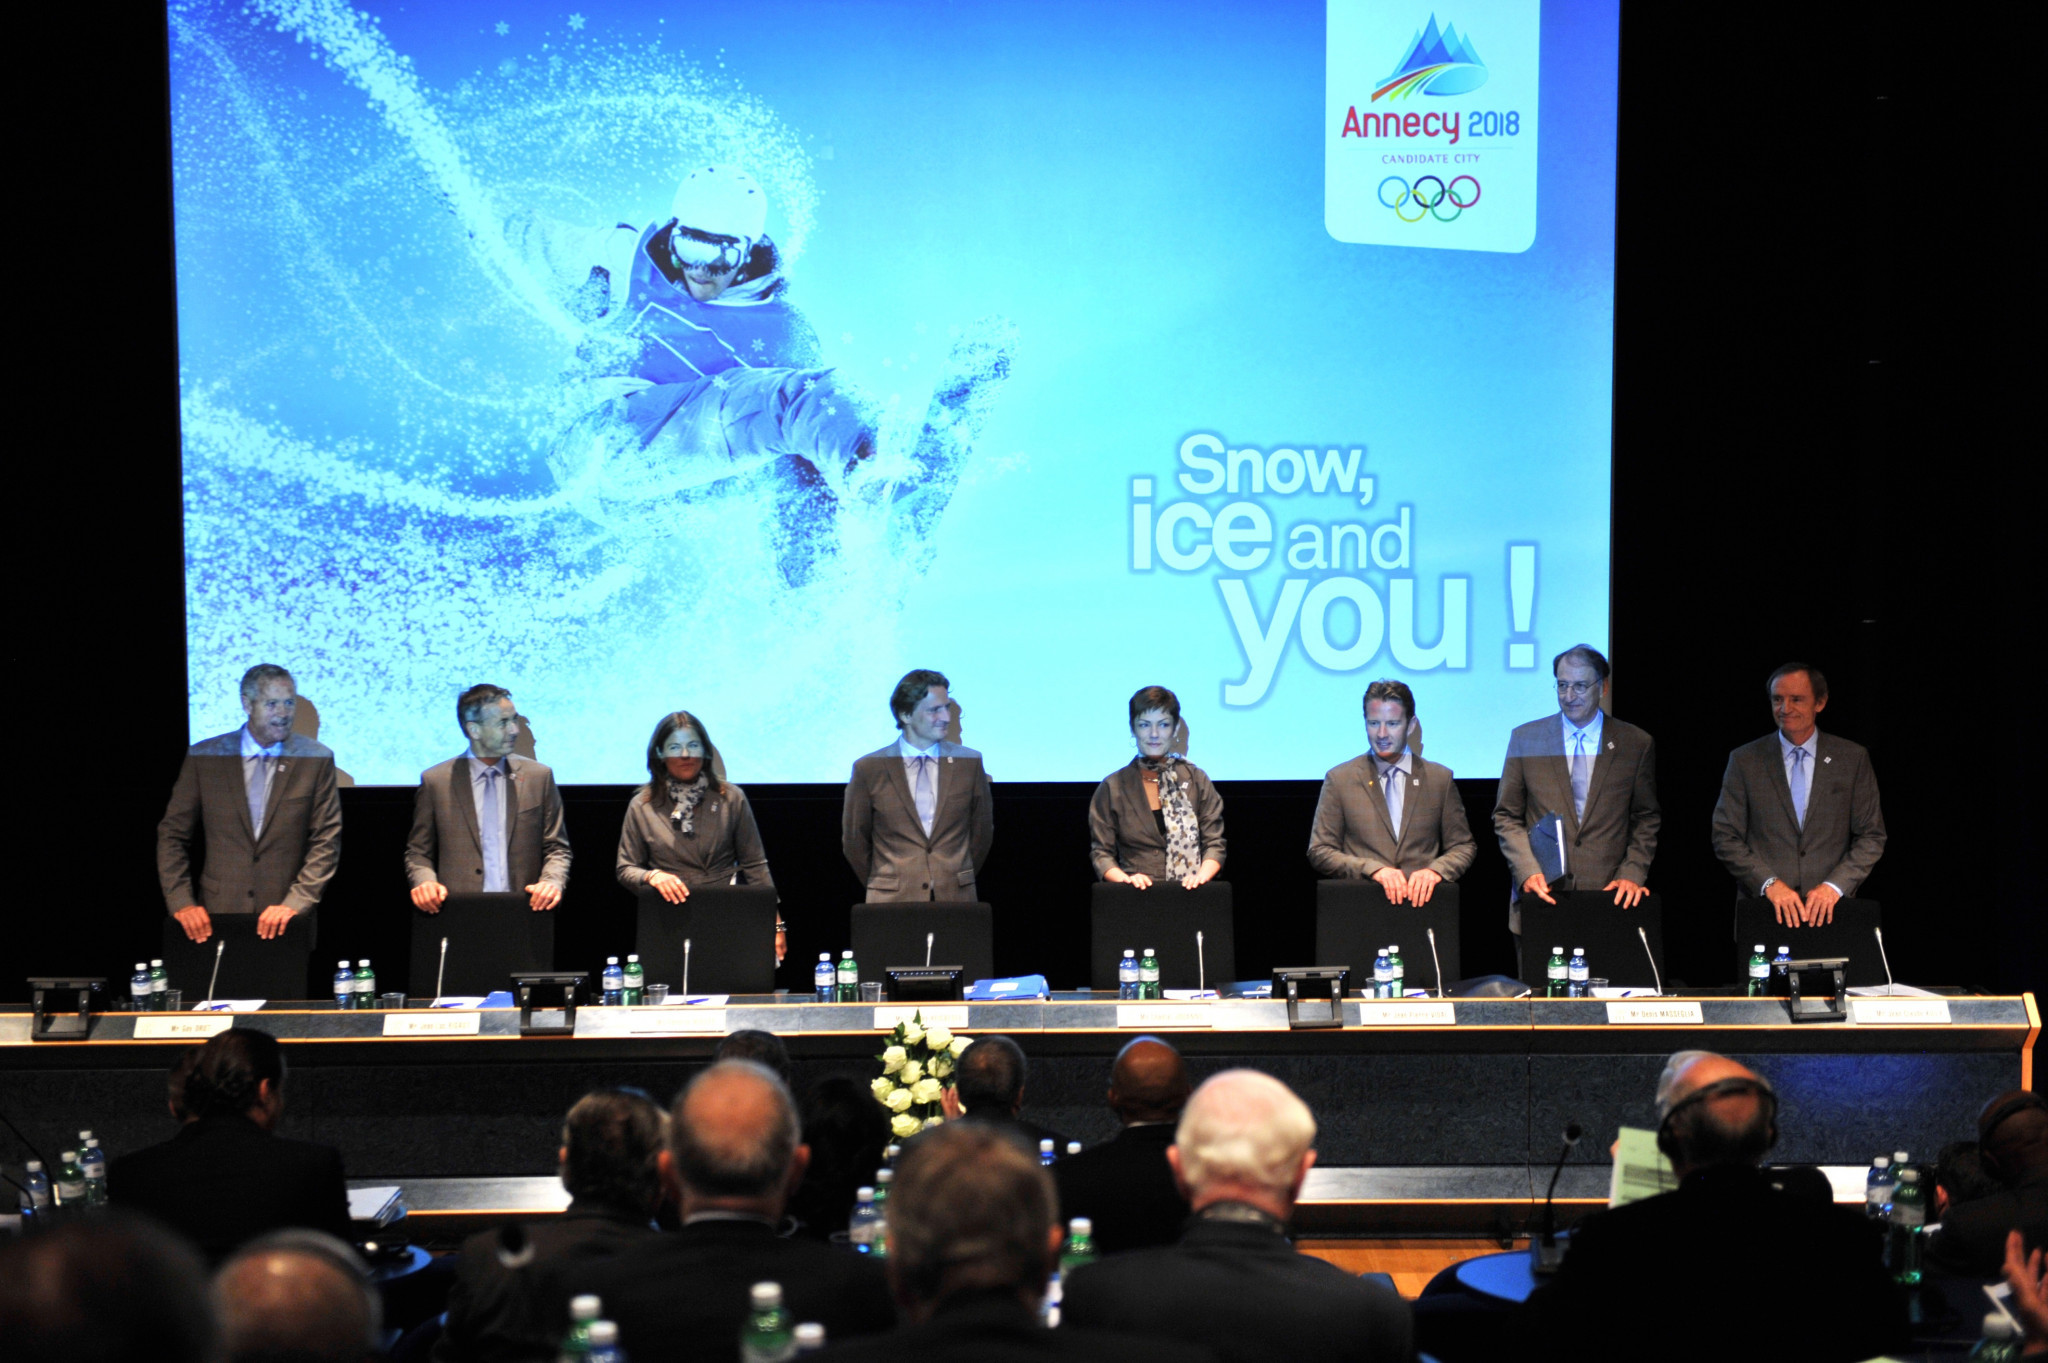 Annecy's bid for the 2018 Winter Games came a distant third behind winners Pyeonchang and Munich ©Getty Images